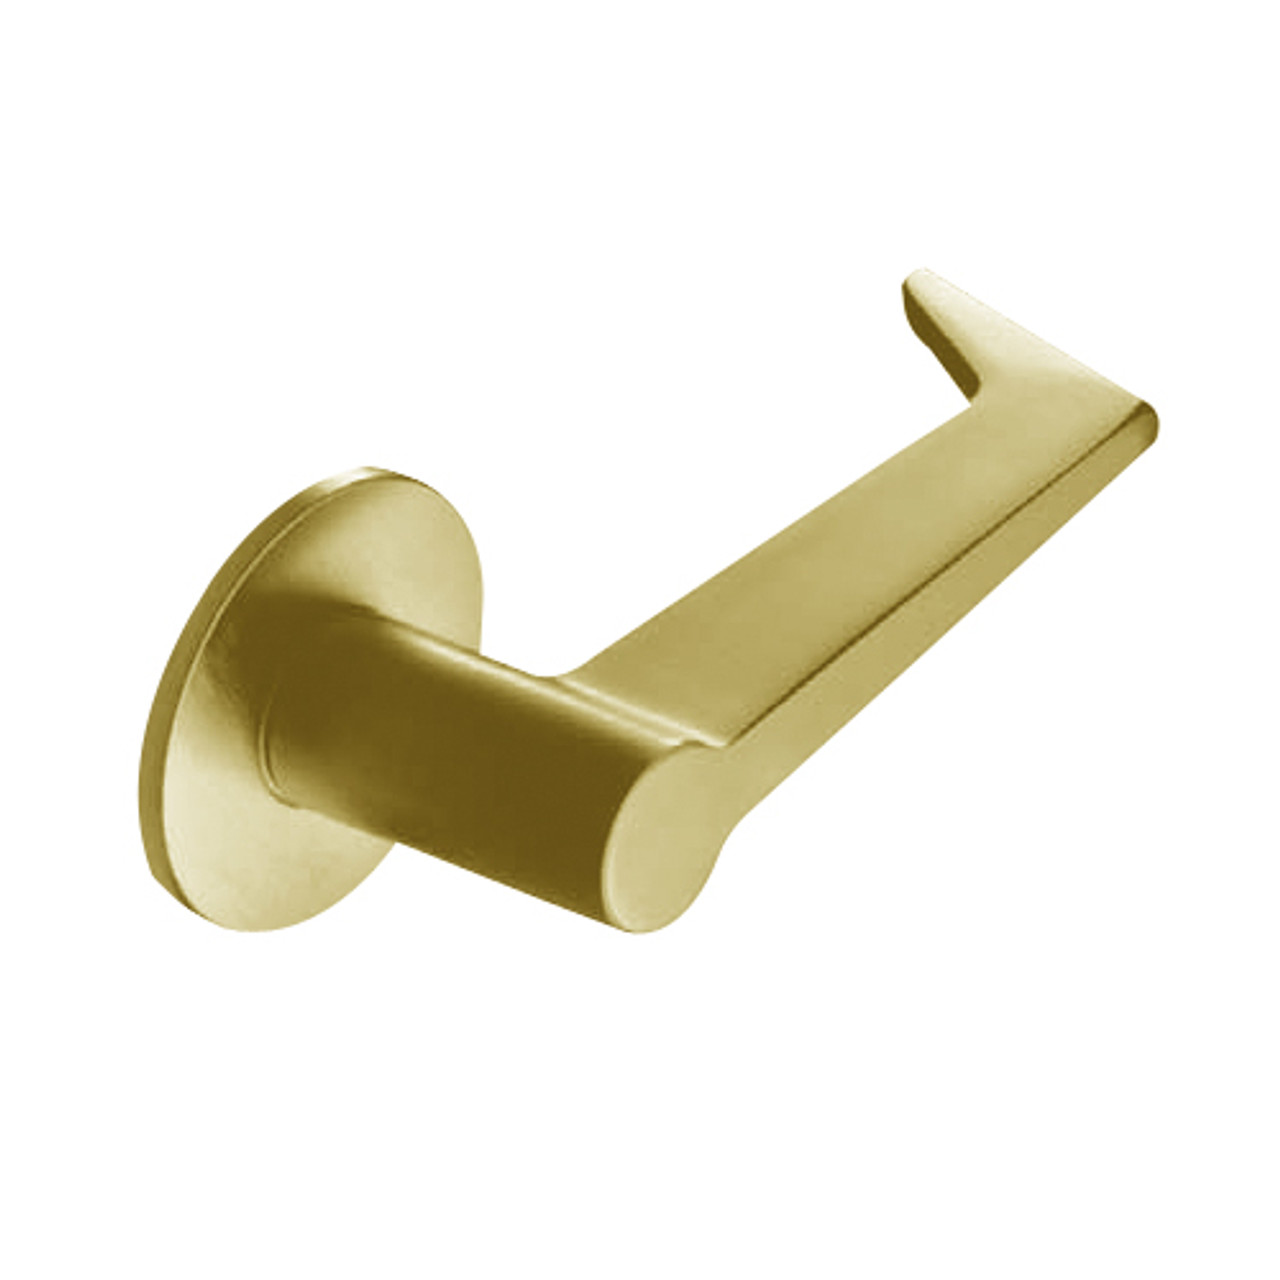 ML2056-ESB-606-CL7 Corbin Russwin ML2000 Series IC 7-Pin Less Core Mortise Classroom Locksets with Essex Lever in Satin Brass